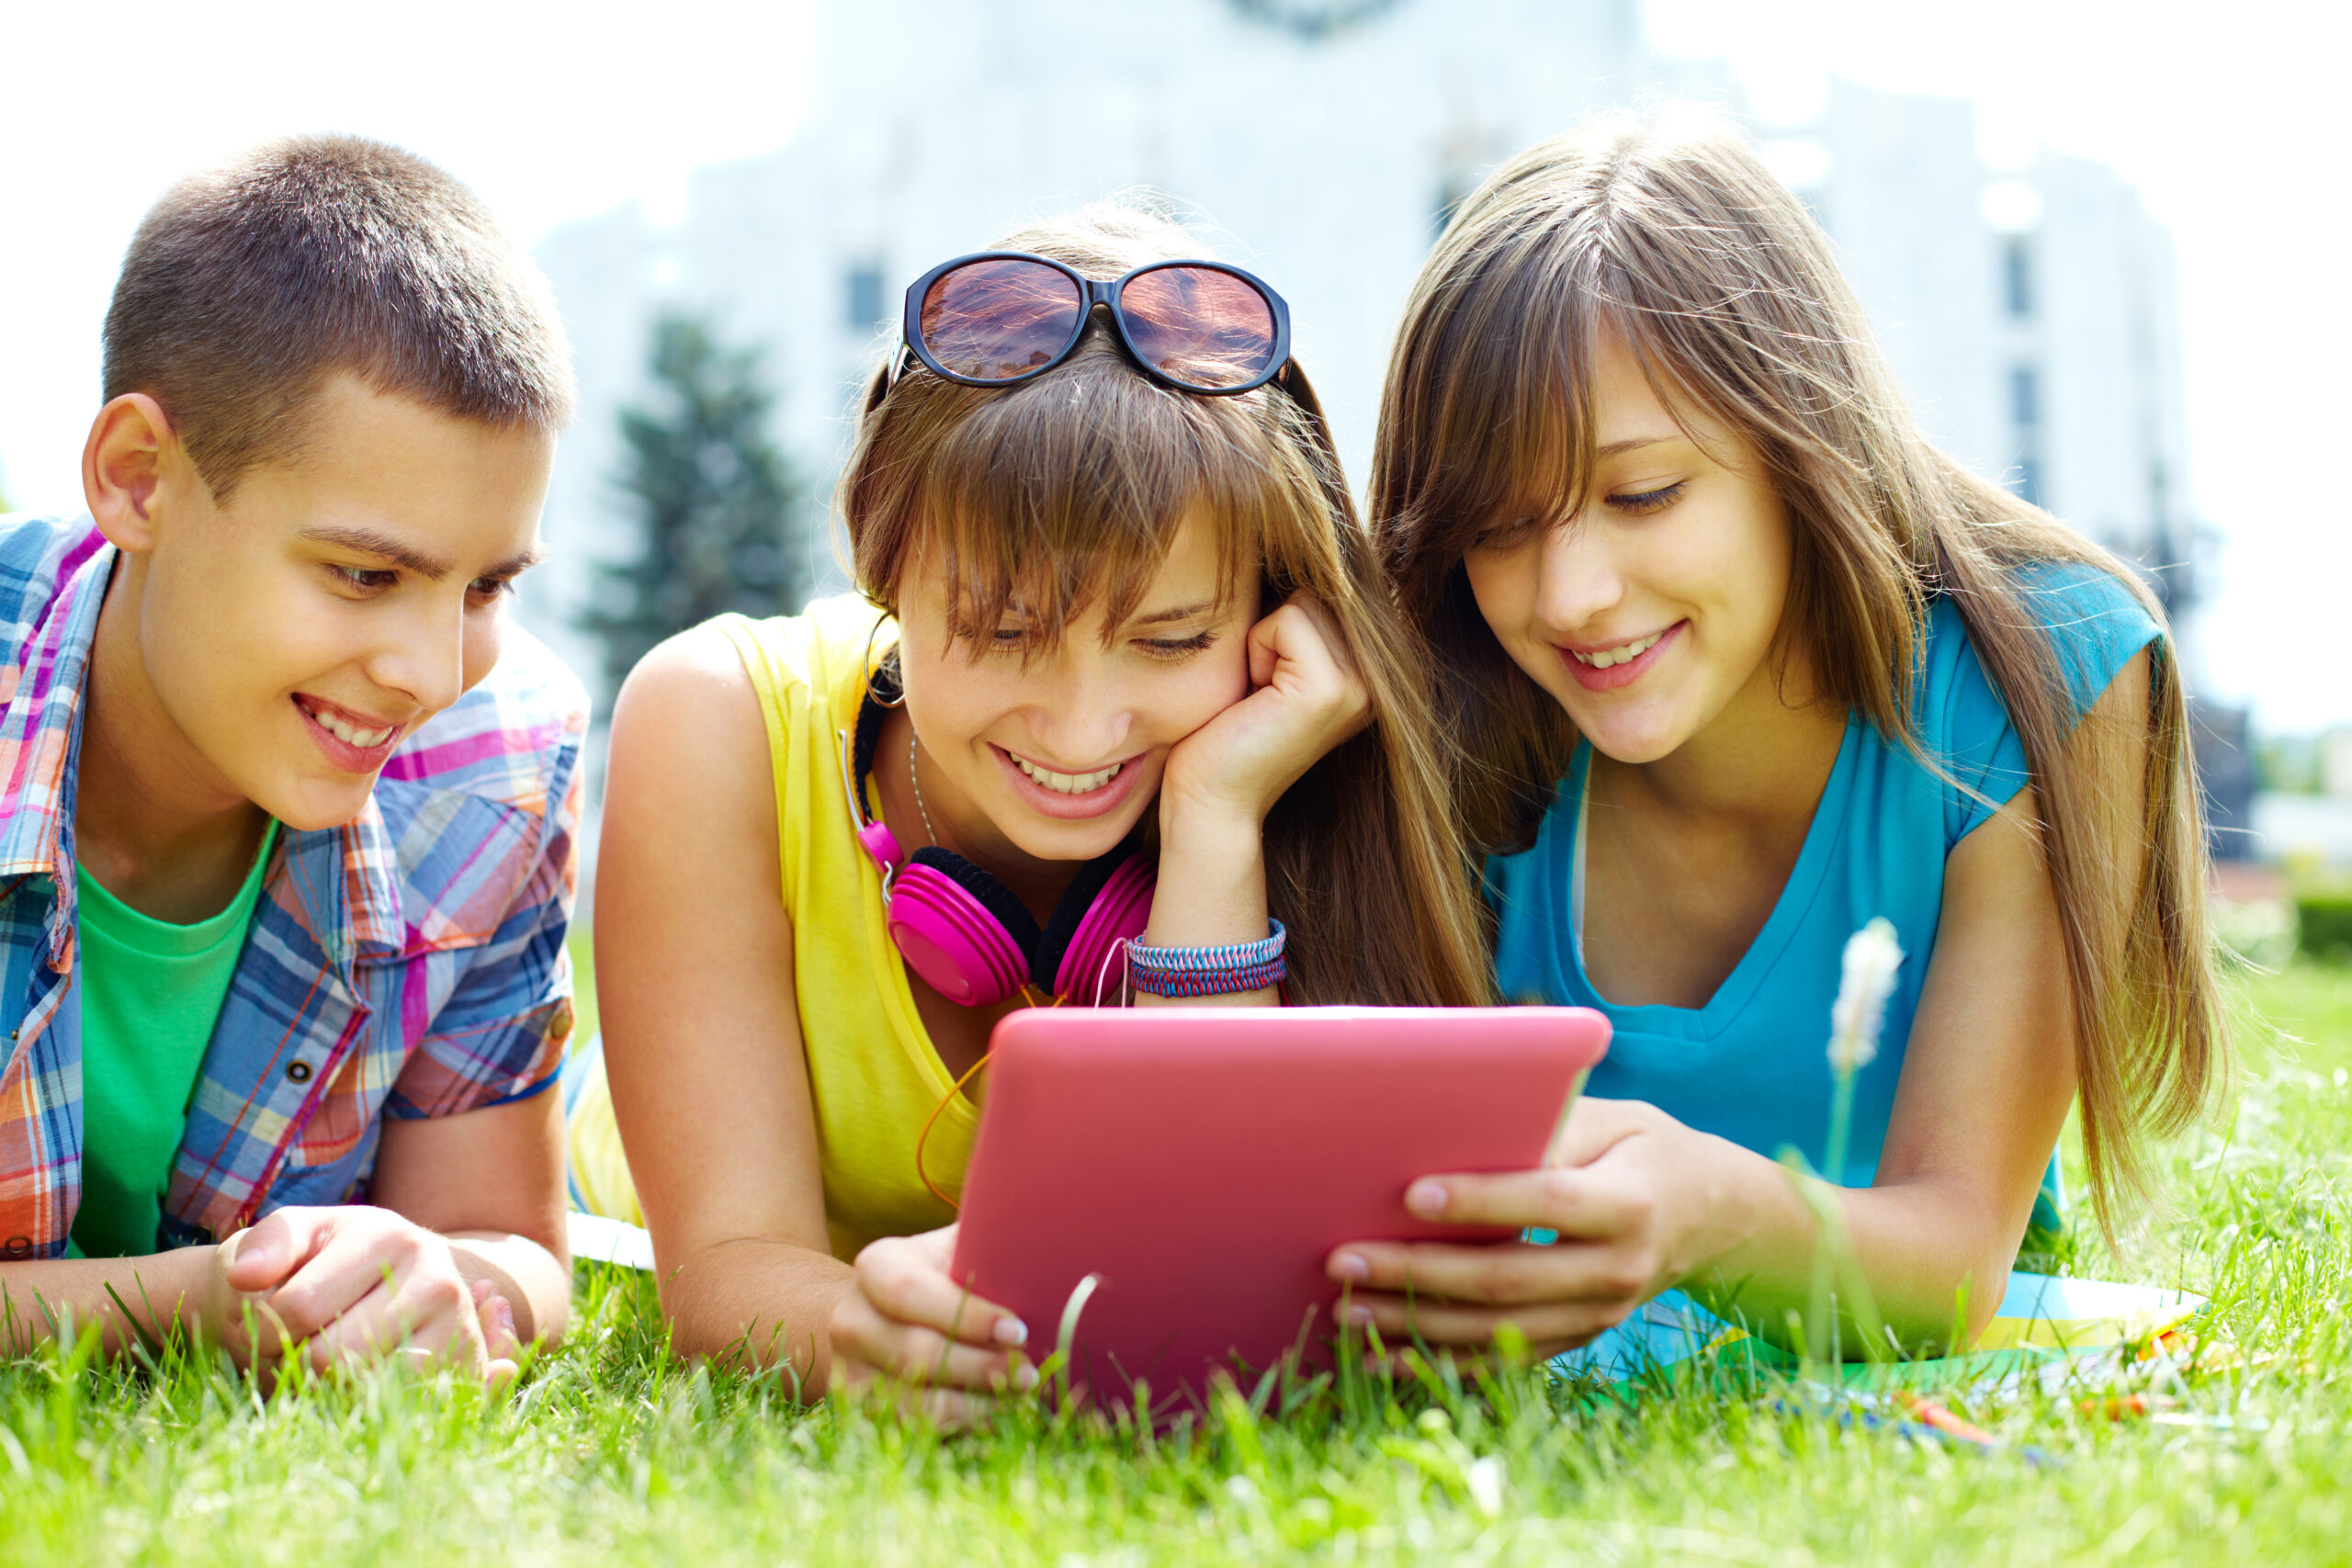 young kids having fun sitting on the grass watching a video together on a digital tablet